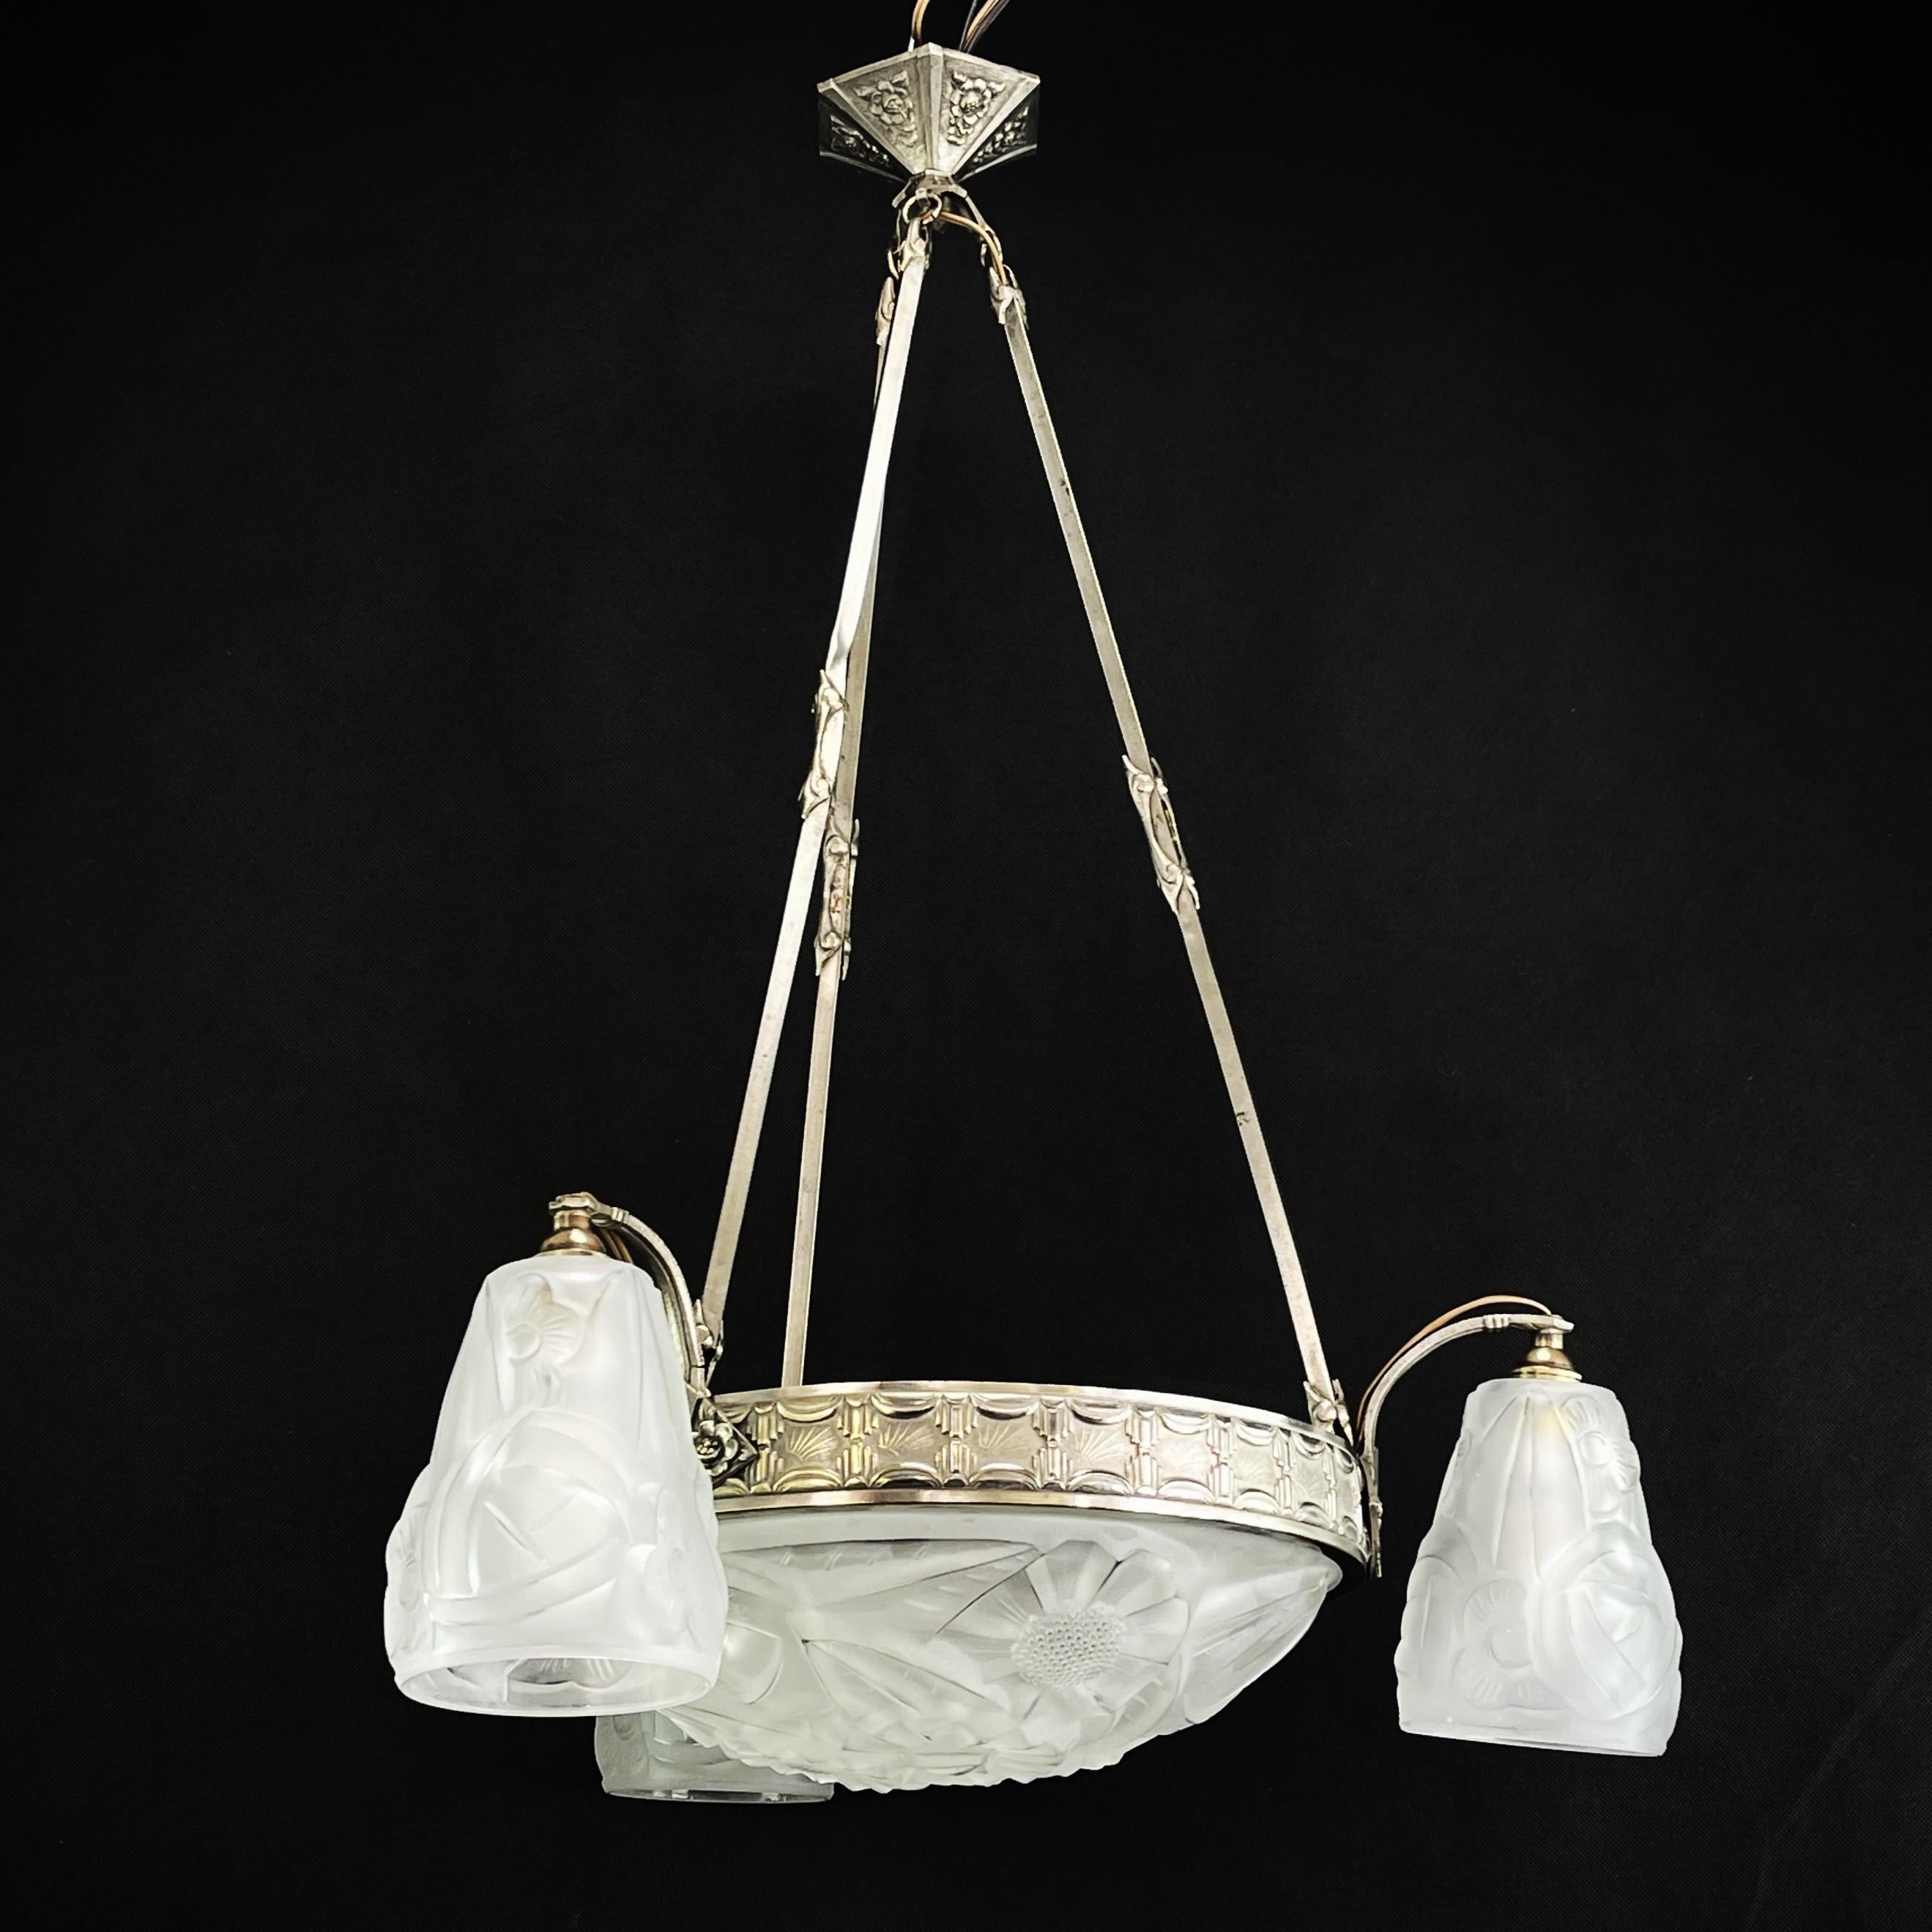 Art Deco Chandelier by Degué

This stunning 1930s Art Deco chandelier is an outstanding example of the elegance and sophistication of the Art Deco style. With its combination of metal and glass, this chandelier embodies the glamor and opulence of